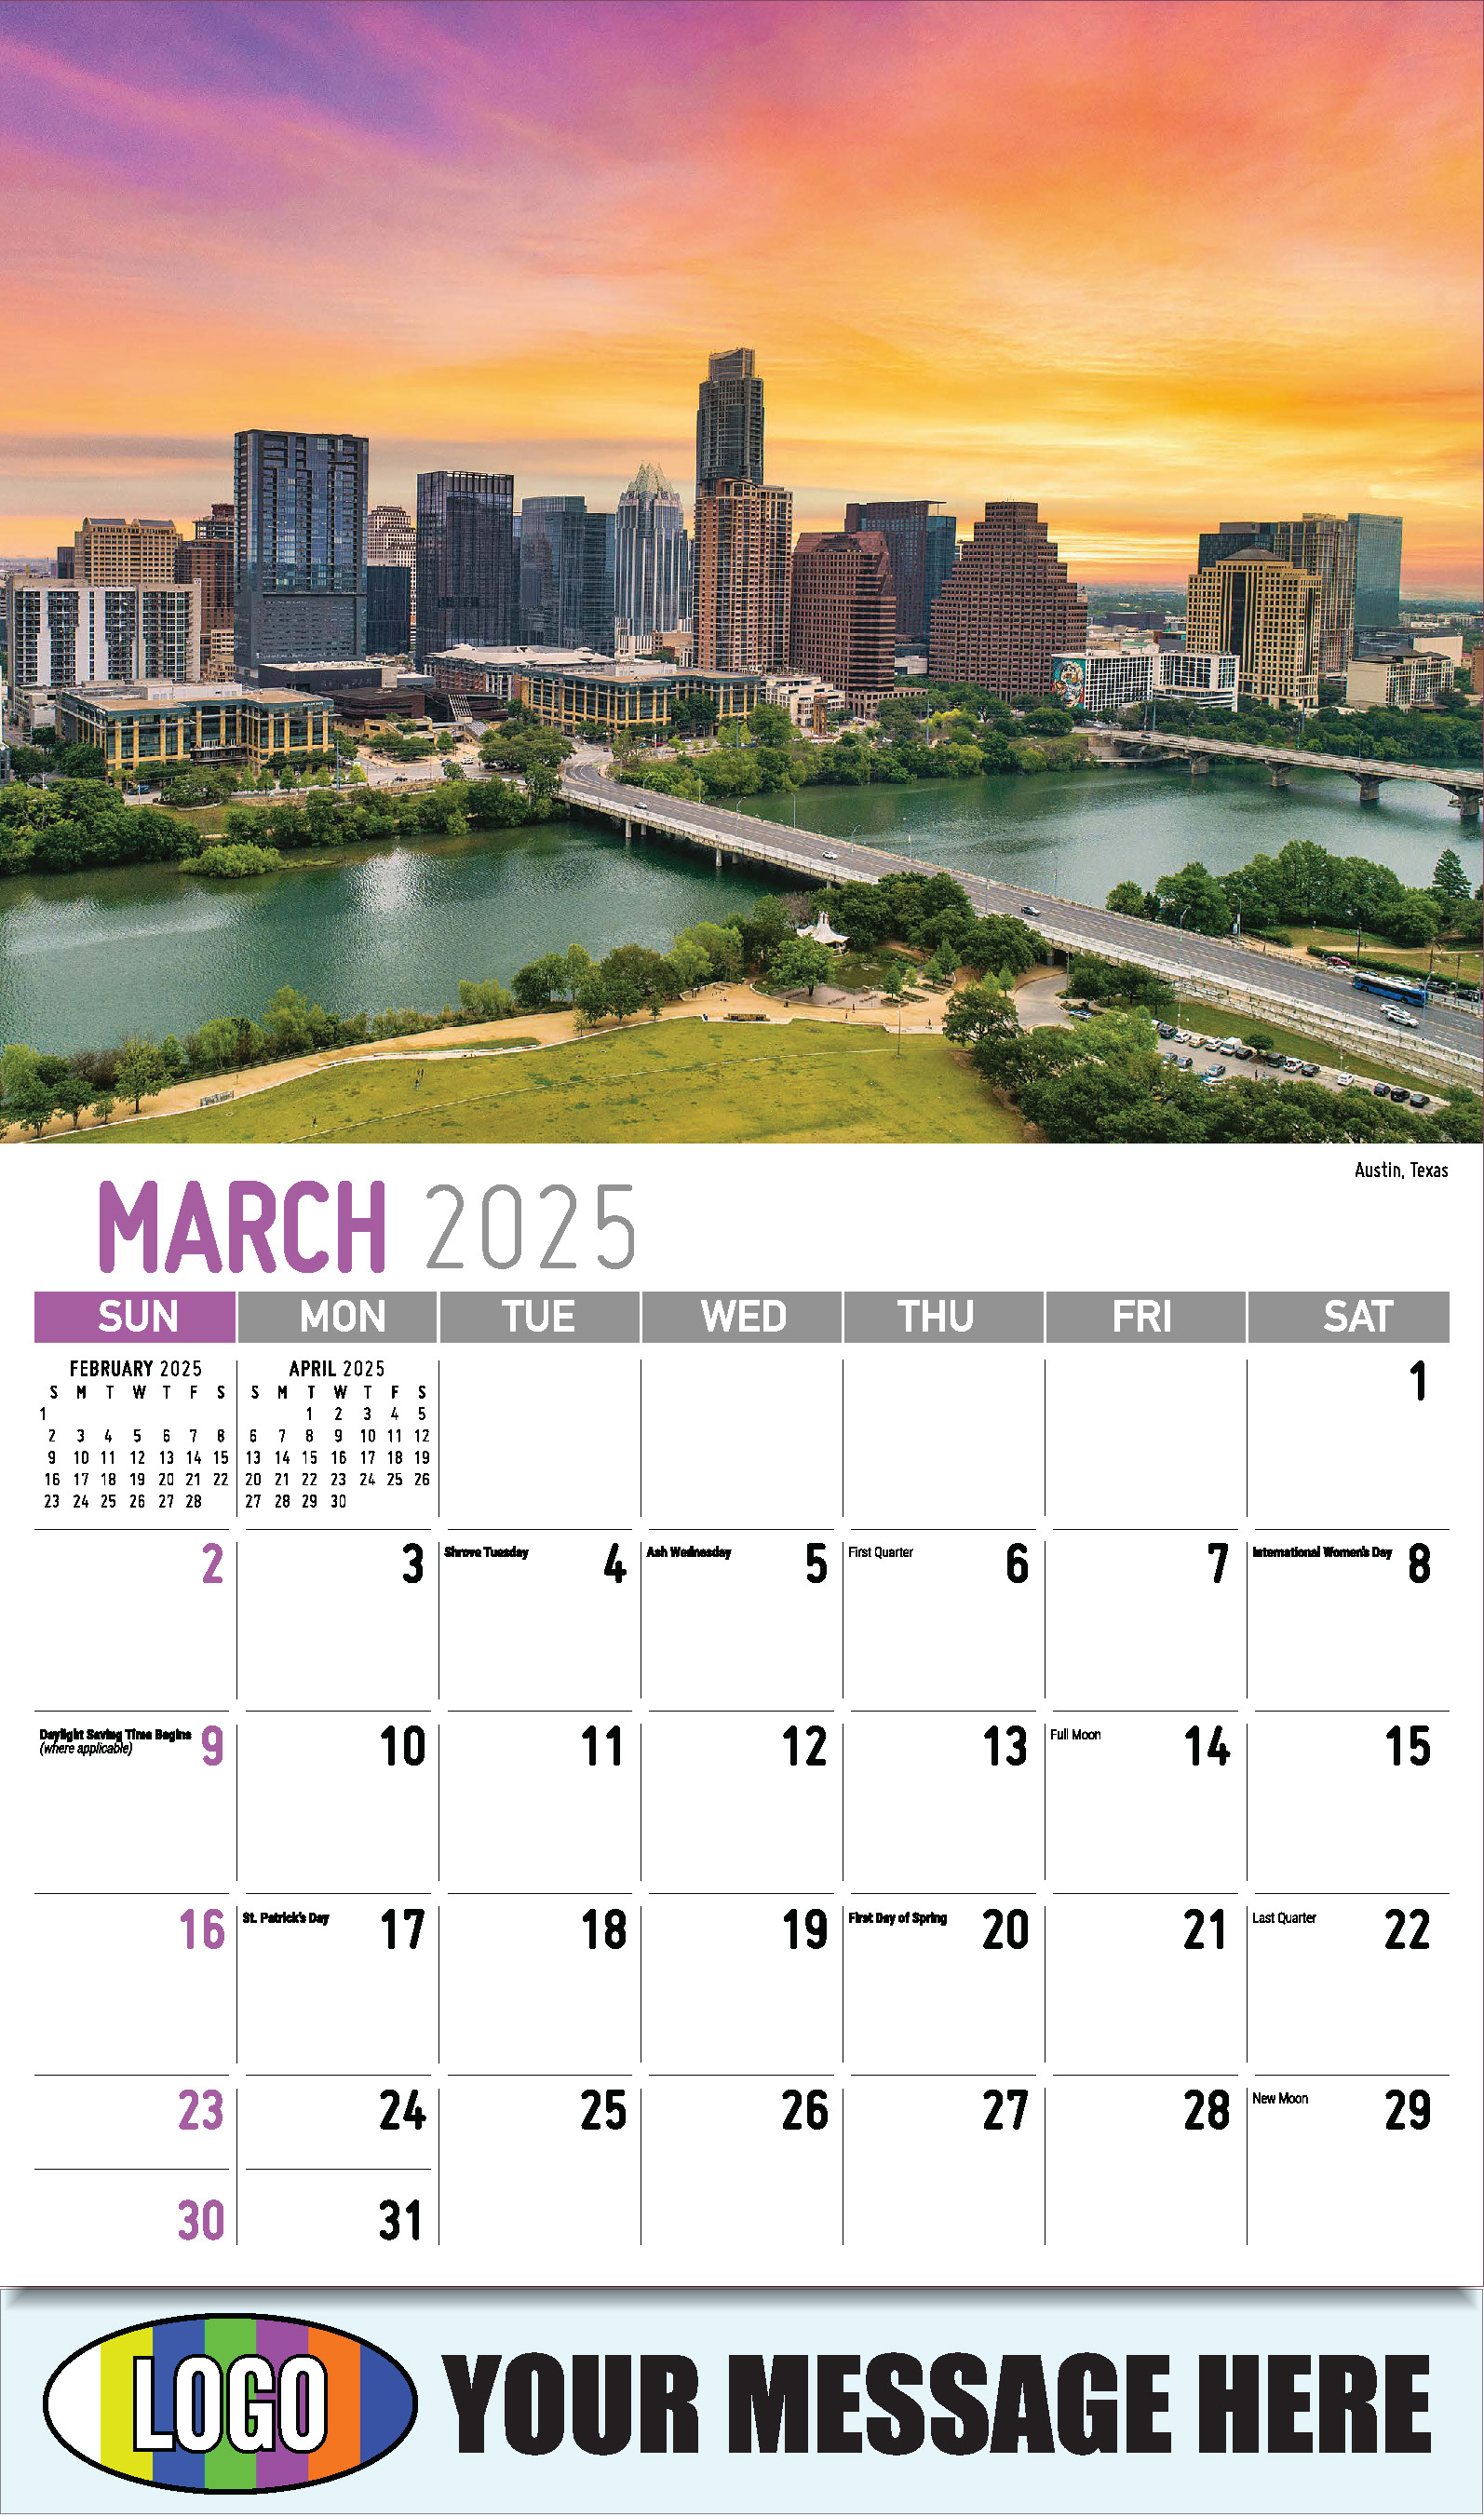 Scenes of Texas 2025 Business Advertising Calendar - March